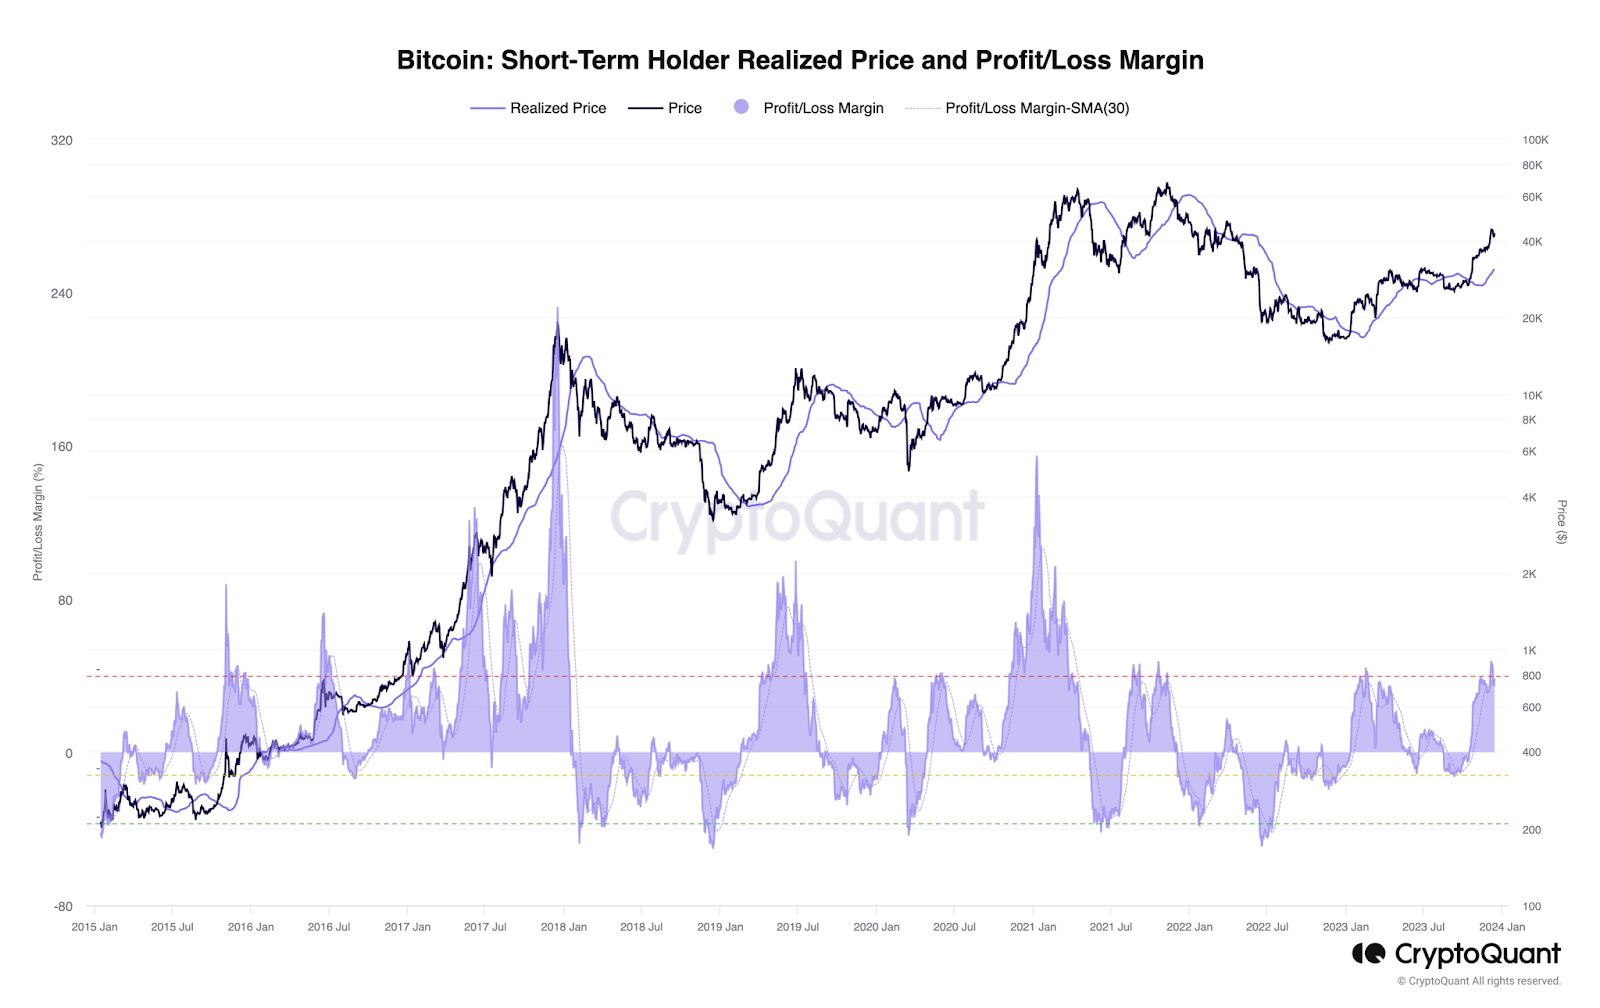 Bitcoin: short-term holder realized price and profit/loss margin